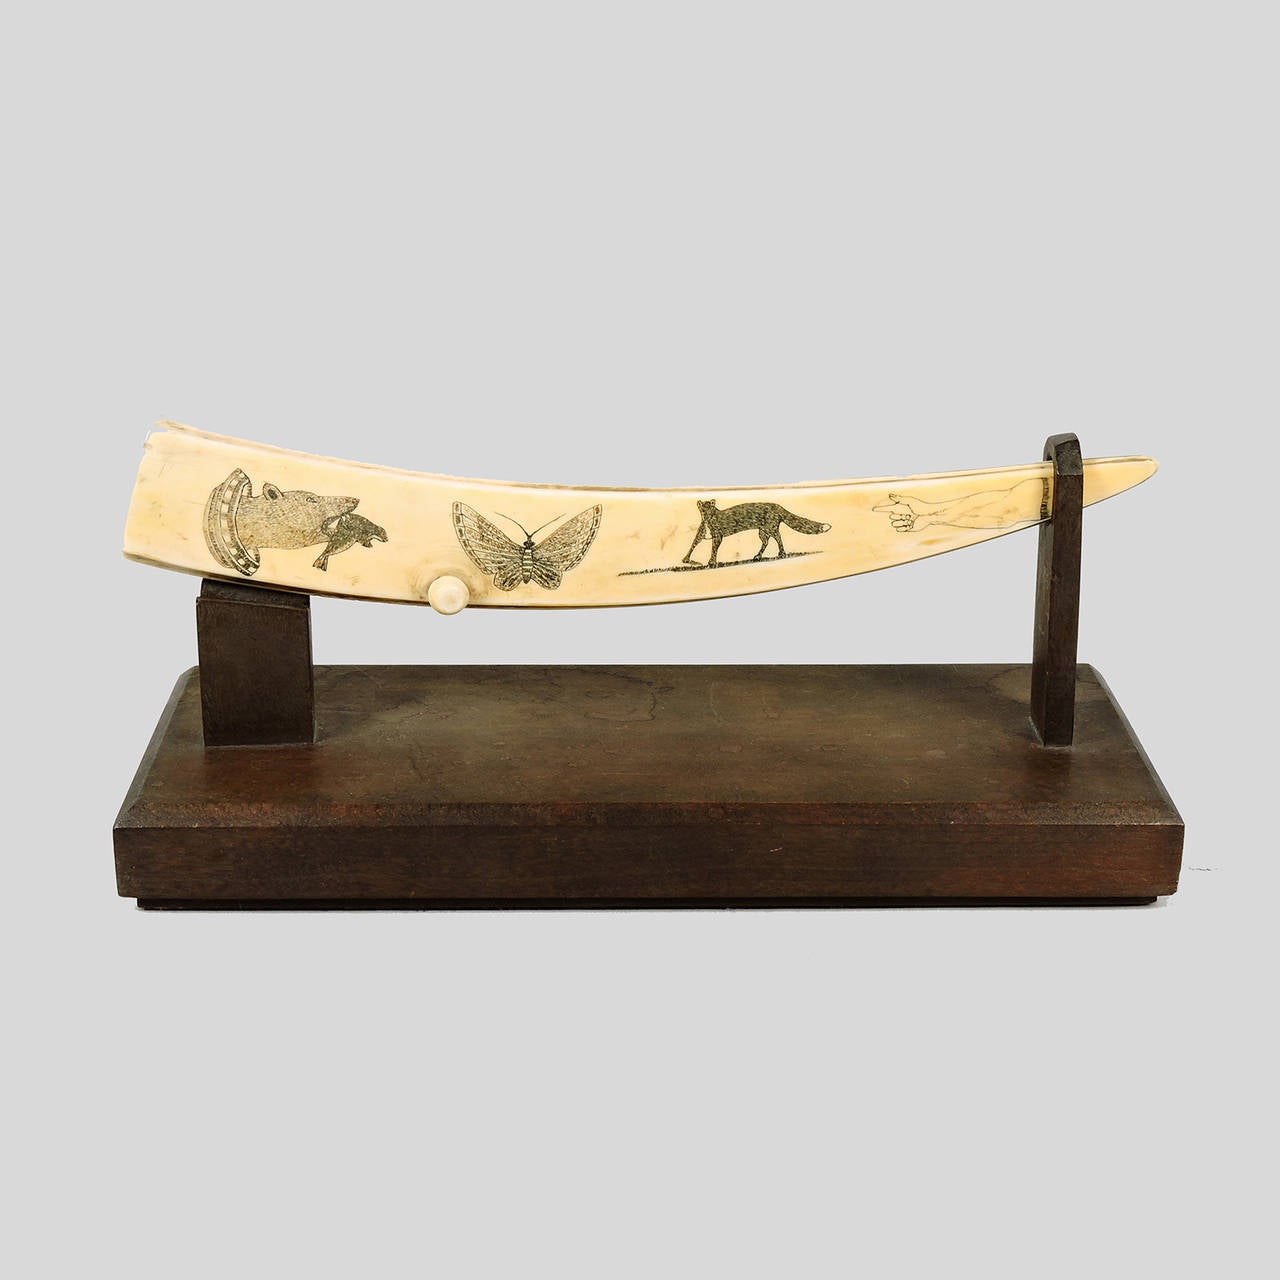 Rare Antique Inuit Walrus Tusk scrimshaw fashioned into a cribbage board and adorned with exceptional scrimshaw decoration including a bear, eagle, fox, butterfly, and pointing hand.  Includes wooden stand. 
Dimensions: 12 3/4 x 1 1/2 inches